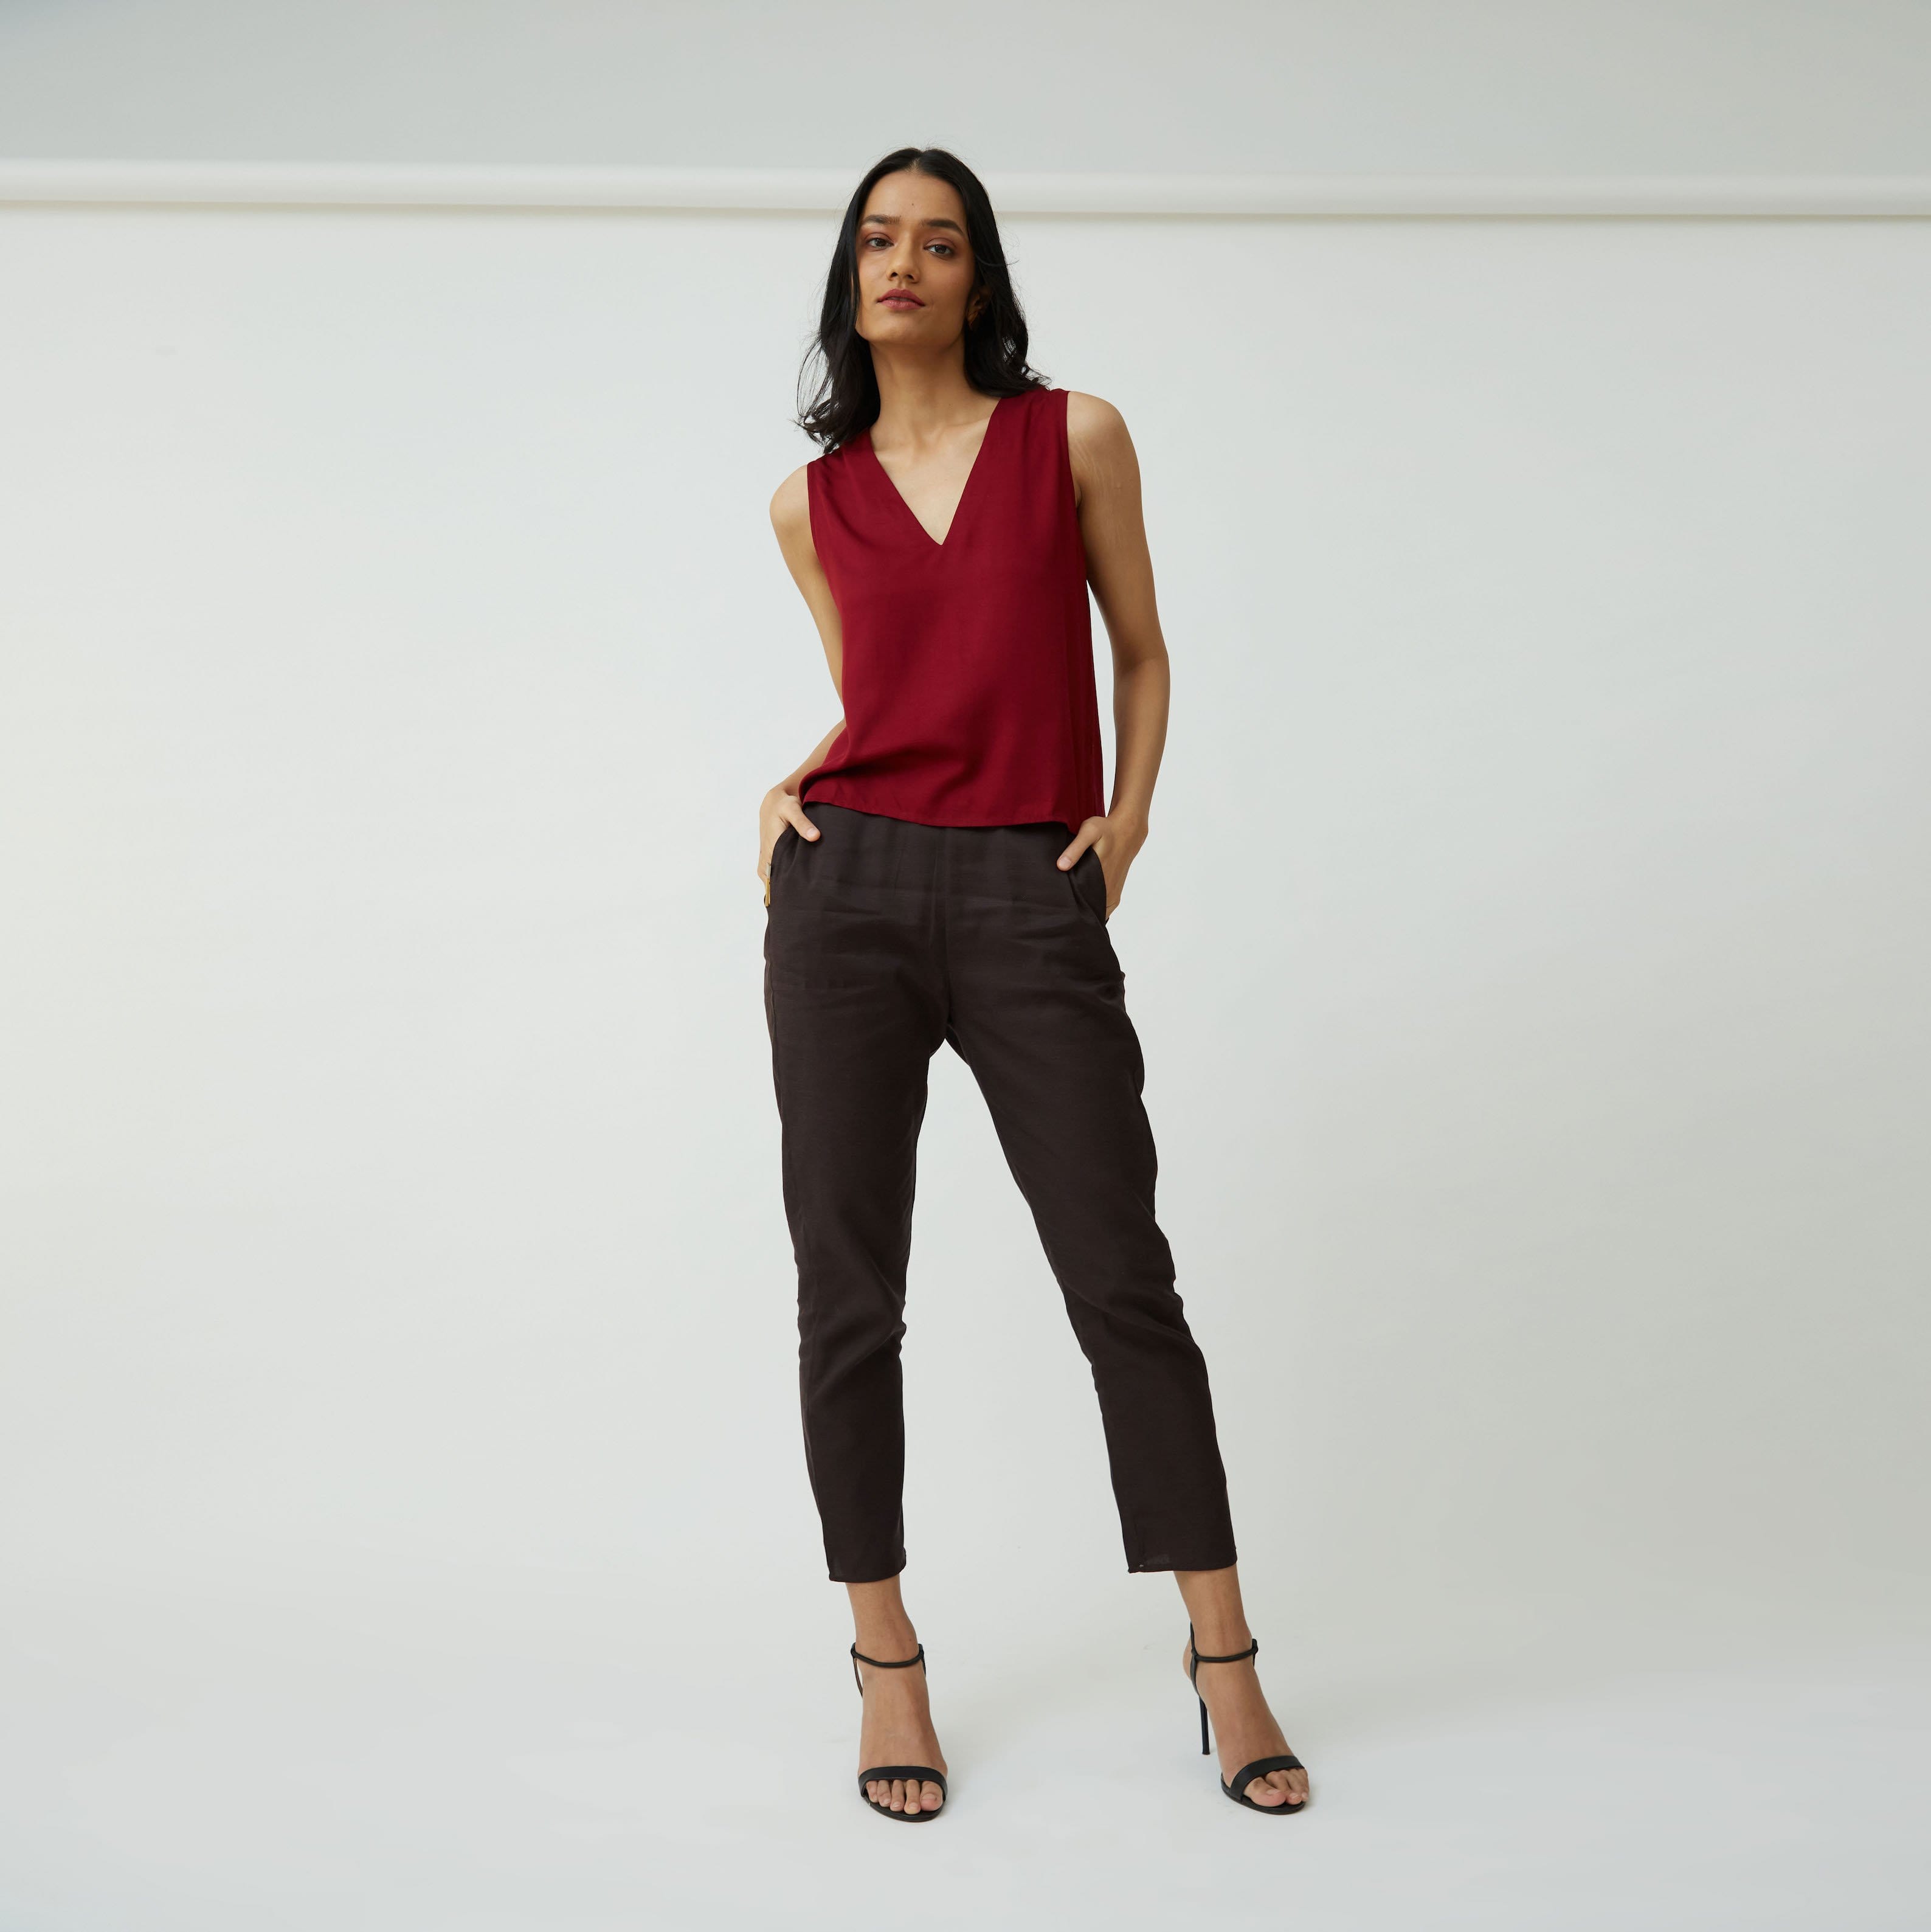 Saltpetre's womens formal, semi-formal, casual and occasion wear in 100% organic cotton. In burgundy brown with a v-shape neck shell top and narrow leg pants with deep side pockets.